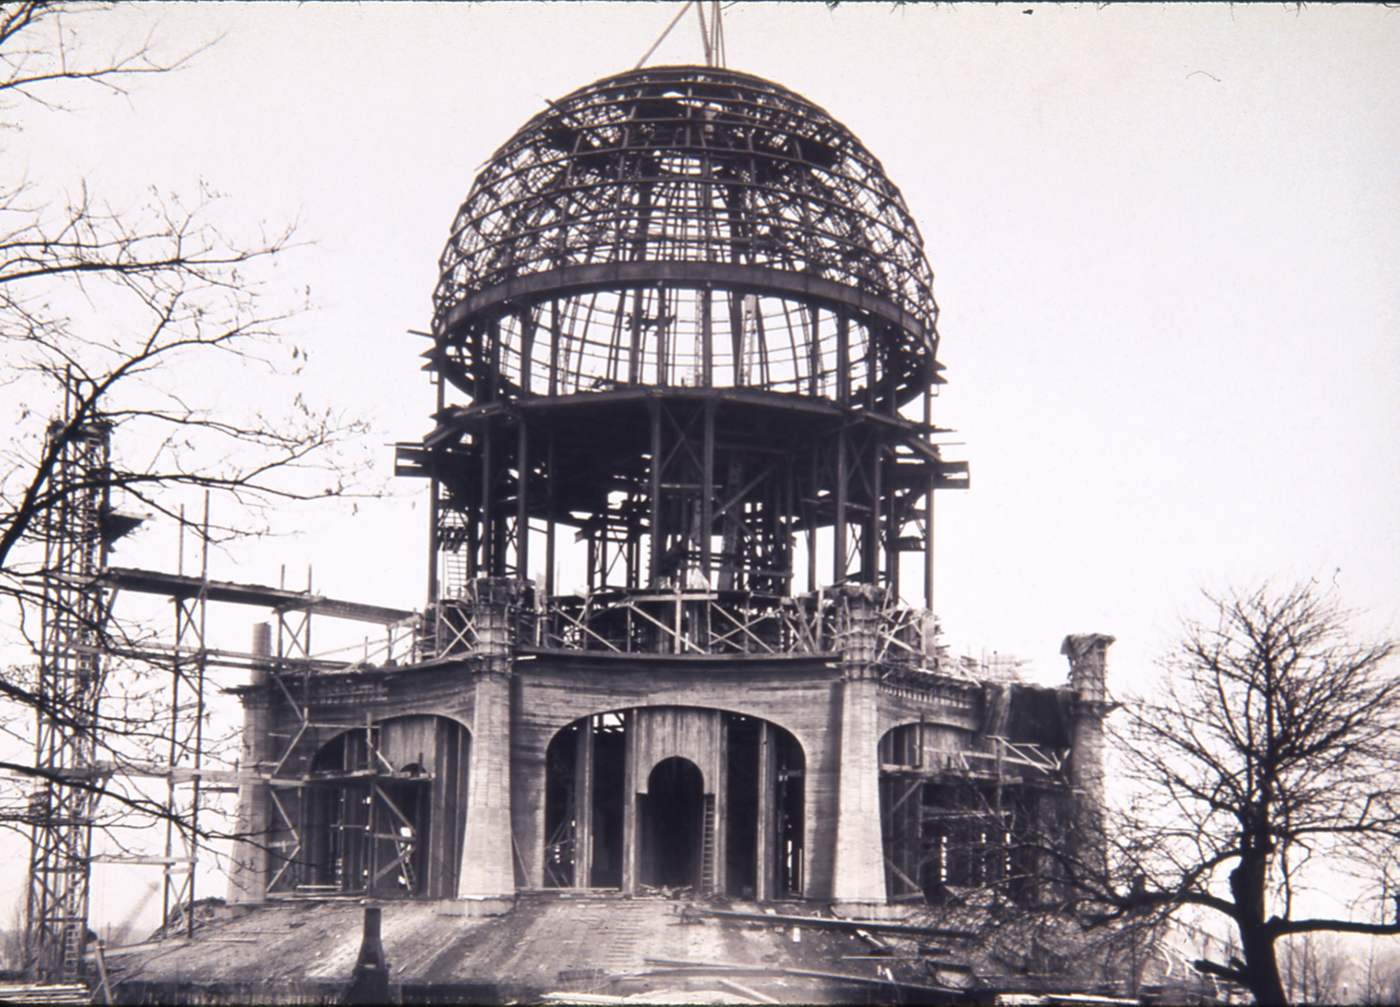 Construction of the Bahá’i House of Worship in Wilmette, Illinois, north of Chicago. Photo: Courtesy of the US Bahá’í National Center